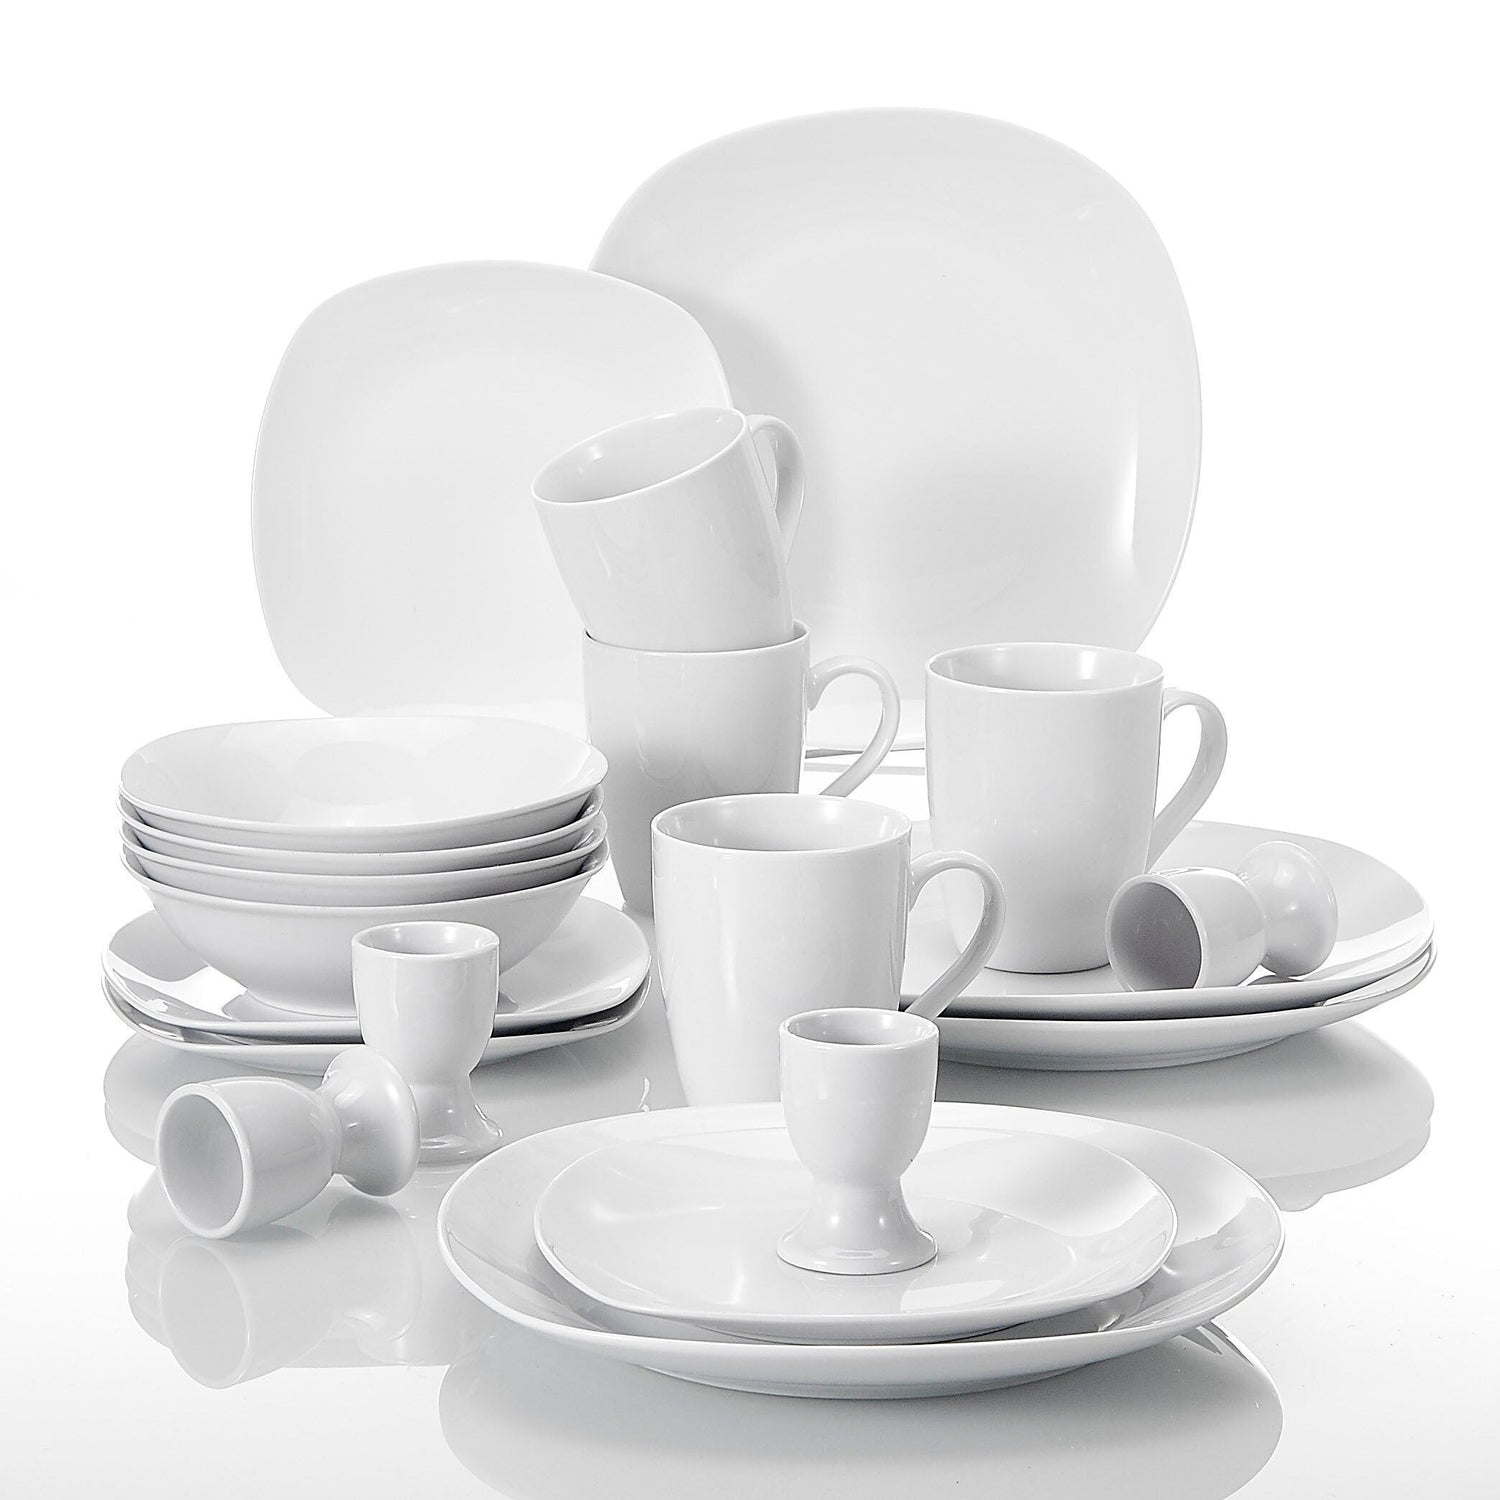 Elisa 20-Piece Porcelain Dinnerware Set with Dinner Plates Soup Bowl Dessert Plate Cups Egg Stand Cup Service for 4 - Nordic Side - 20, Bowl, Cup, Cups, Dessert, Dinner, Dinnerware, Egg, Elis